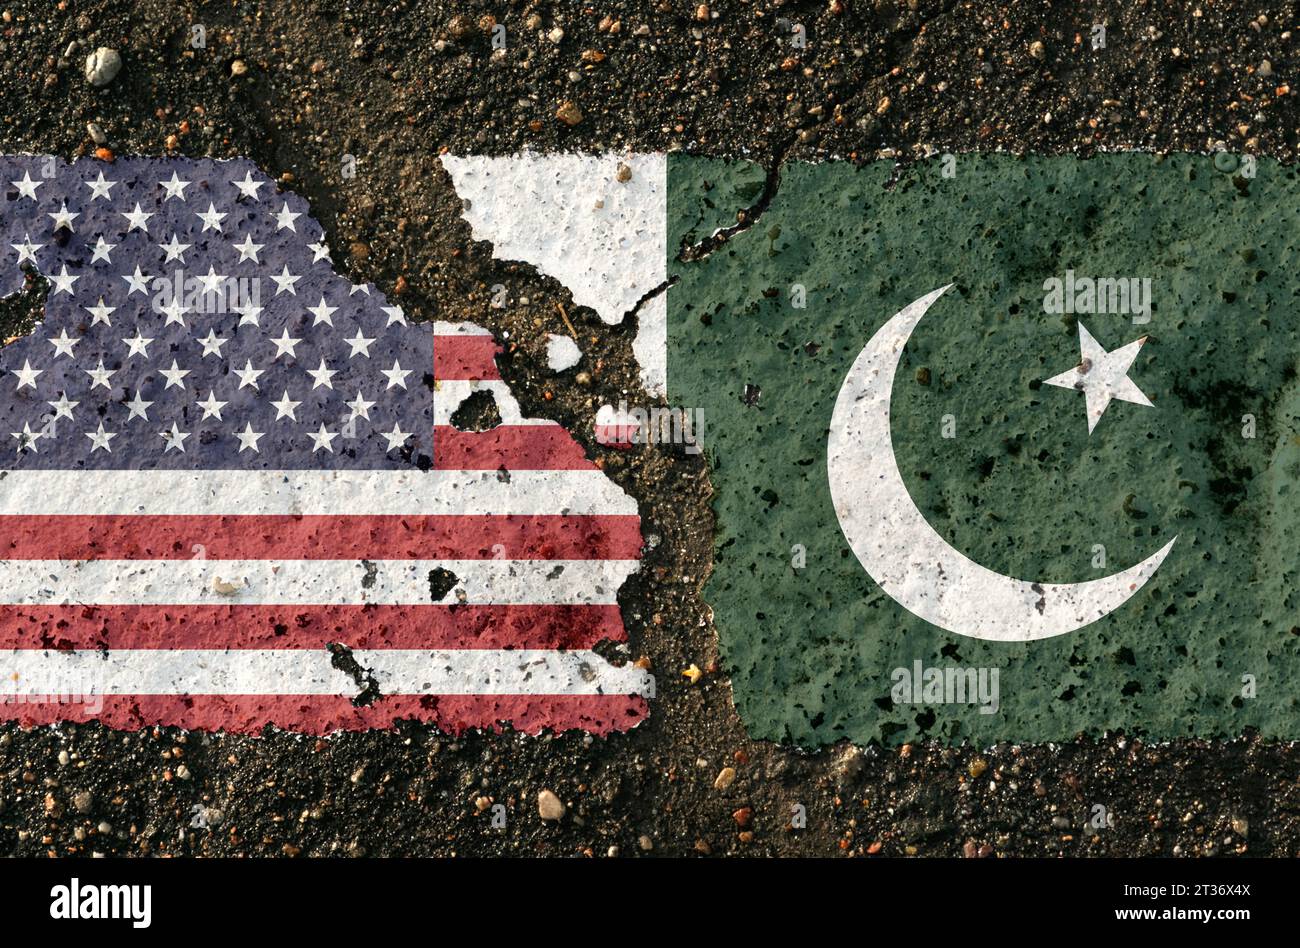 On the pavement are images of the flags of the USA and Pakistan, as a symbol of confrontation. Conceptual image. Stock Photo